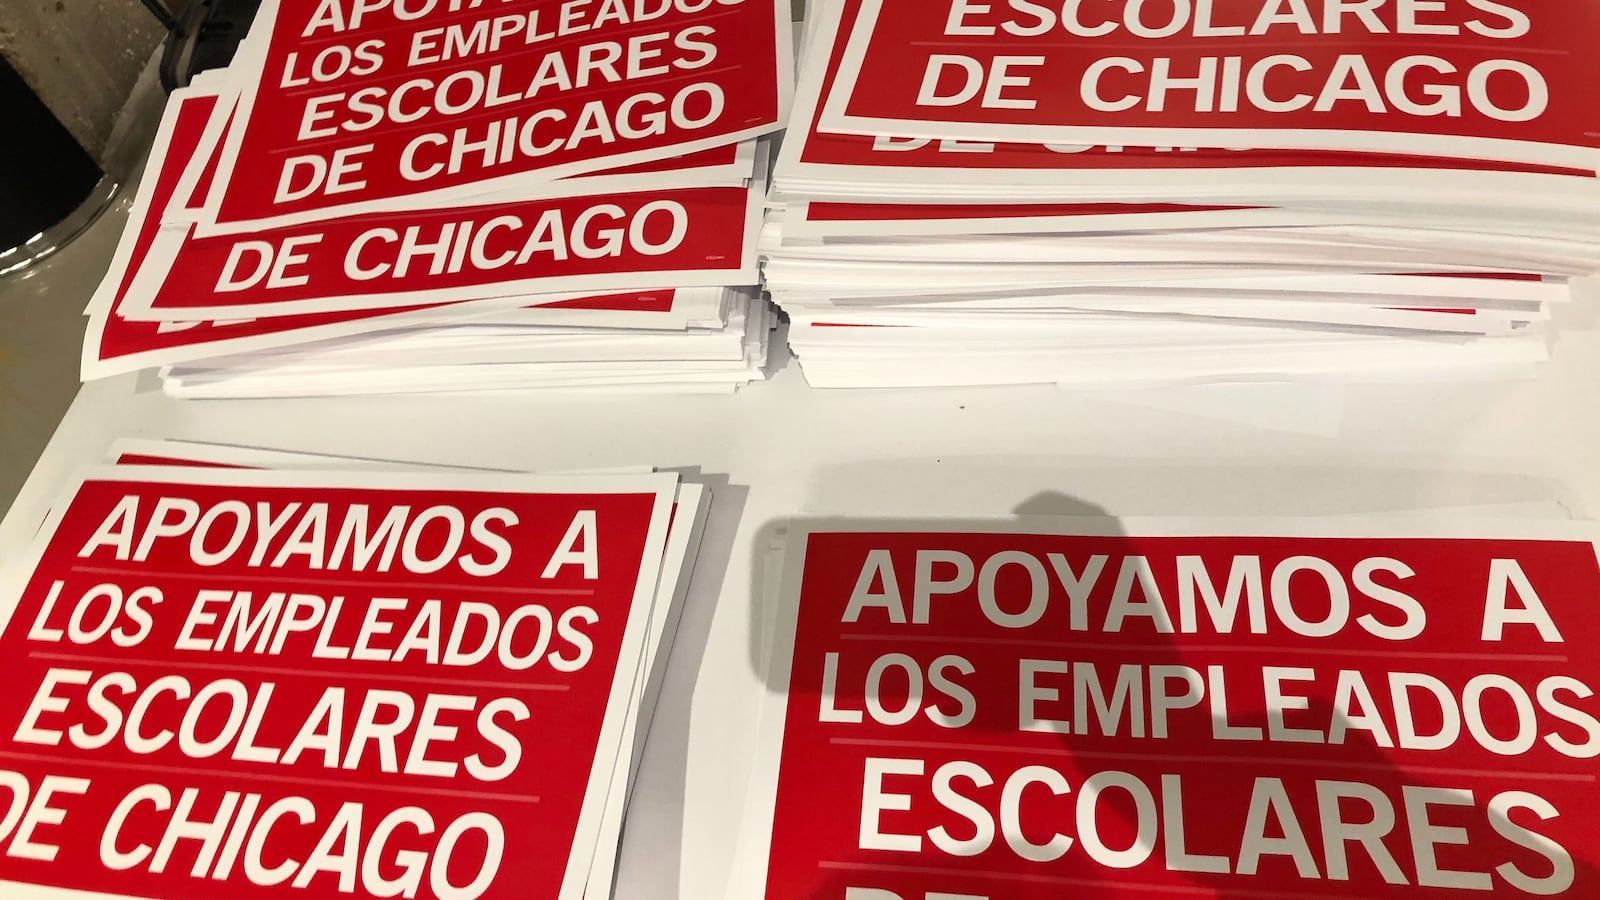 After formalizing a strike vote Oct. 16, 2019, the Chicago Teachers Union distributed picket signs in English and Spanish for members to use during their strike.